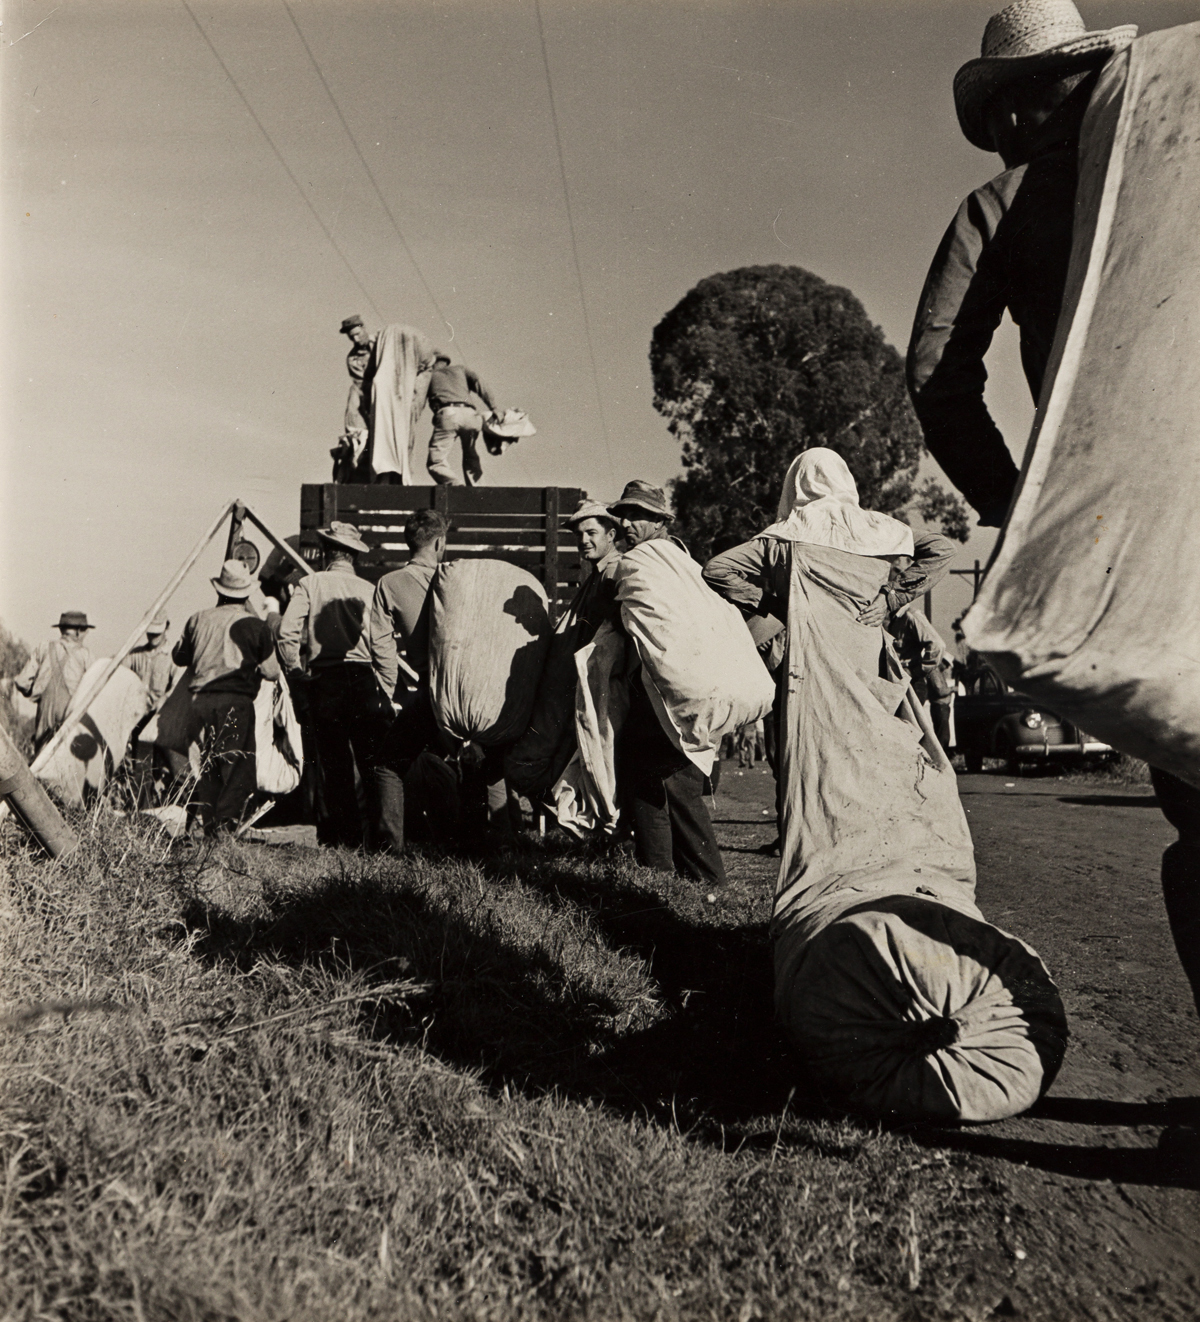 HANSEL MIETH (1909-1998)/OTTO HAGEL (1909-1973) Cotton pickers lining up for weighing in Visalia, California.